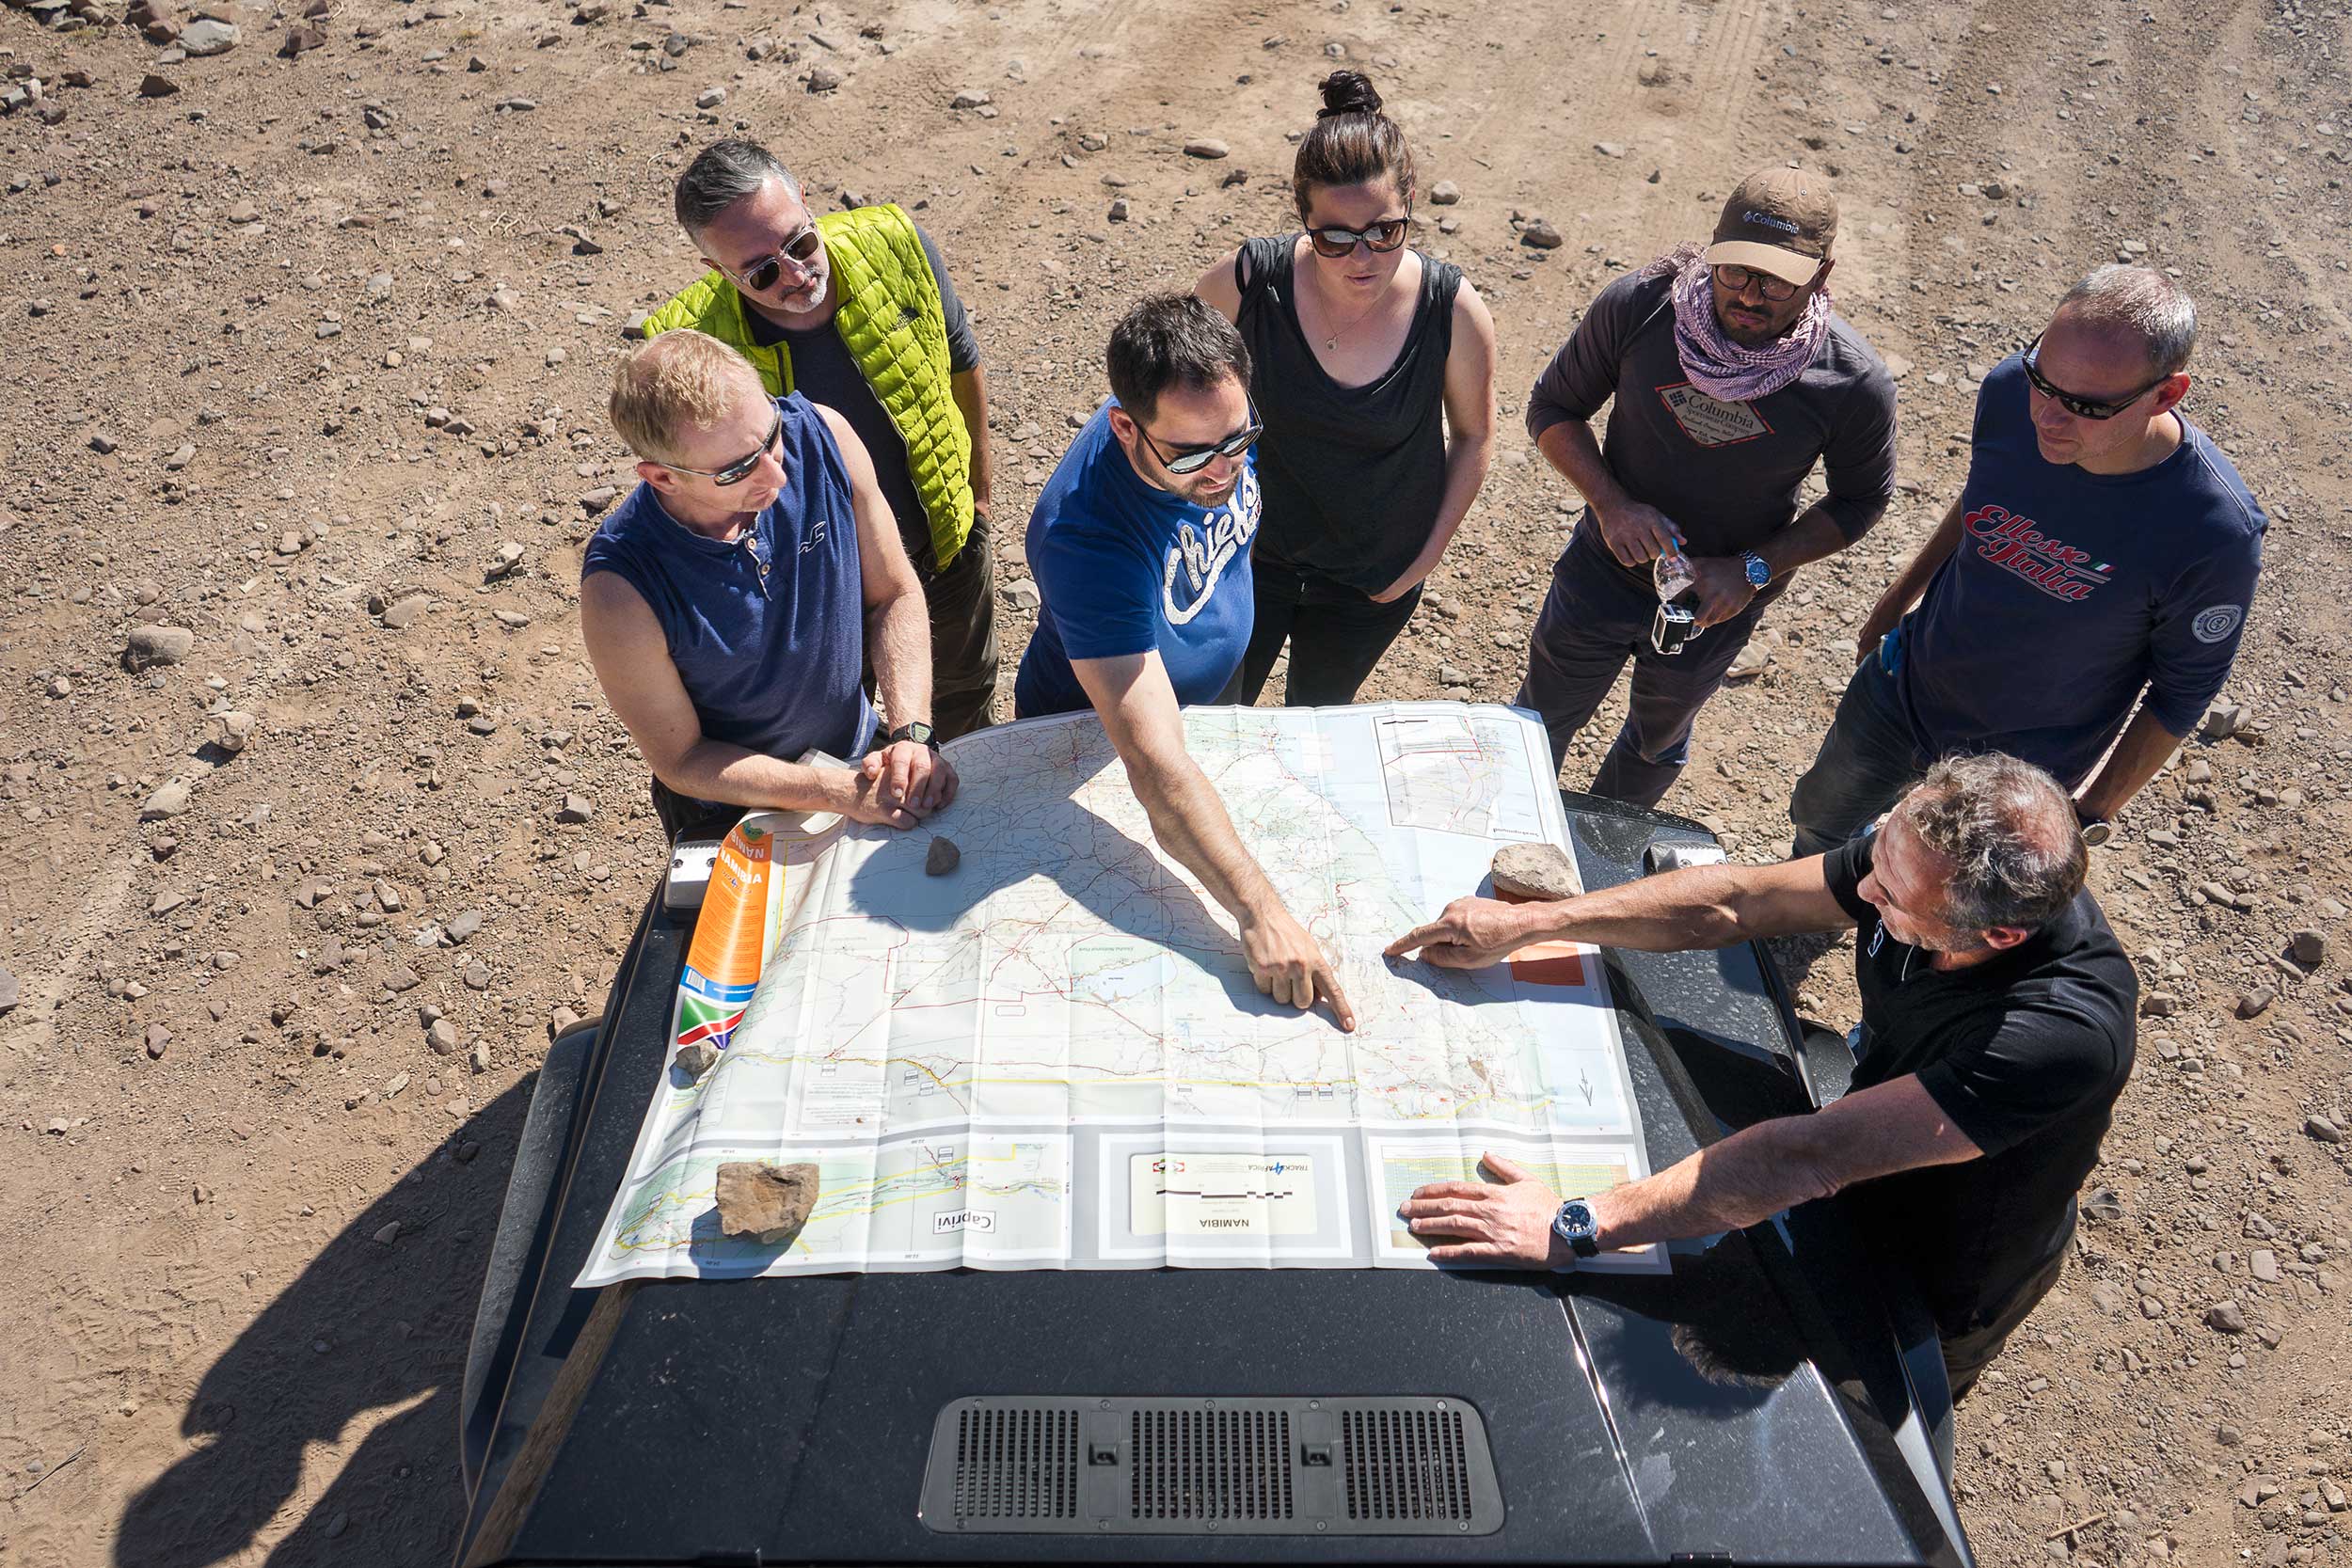 The group gathers around a map to figure out where we are today and where exactly we're headed. The drive was mostly an unplanned adventure, with Mike taking what appeared to be new and arbitrary decision about the route daily. Photo: Apoorva Prasad